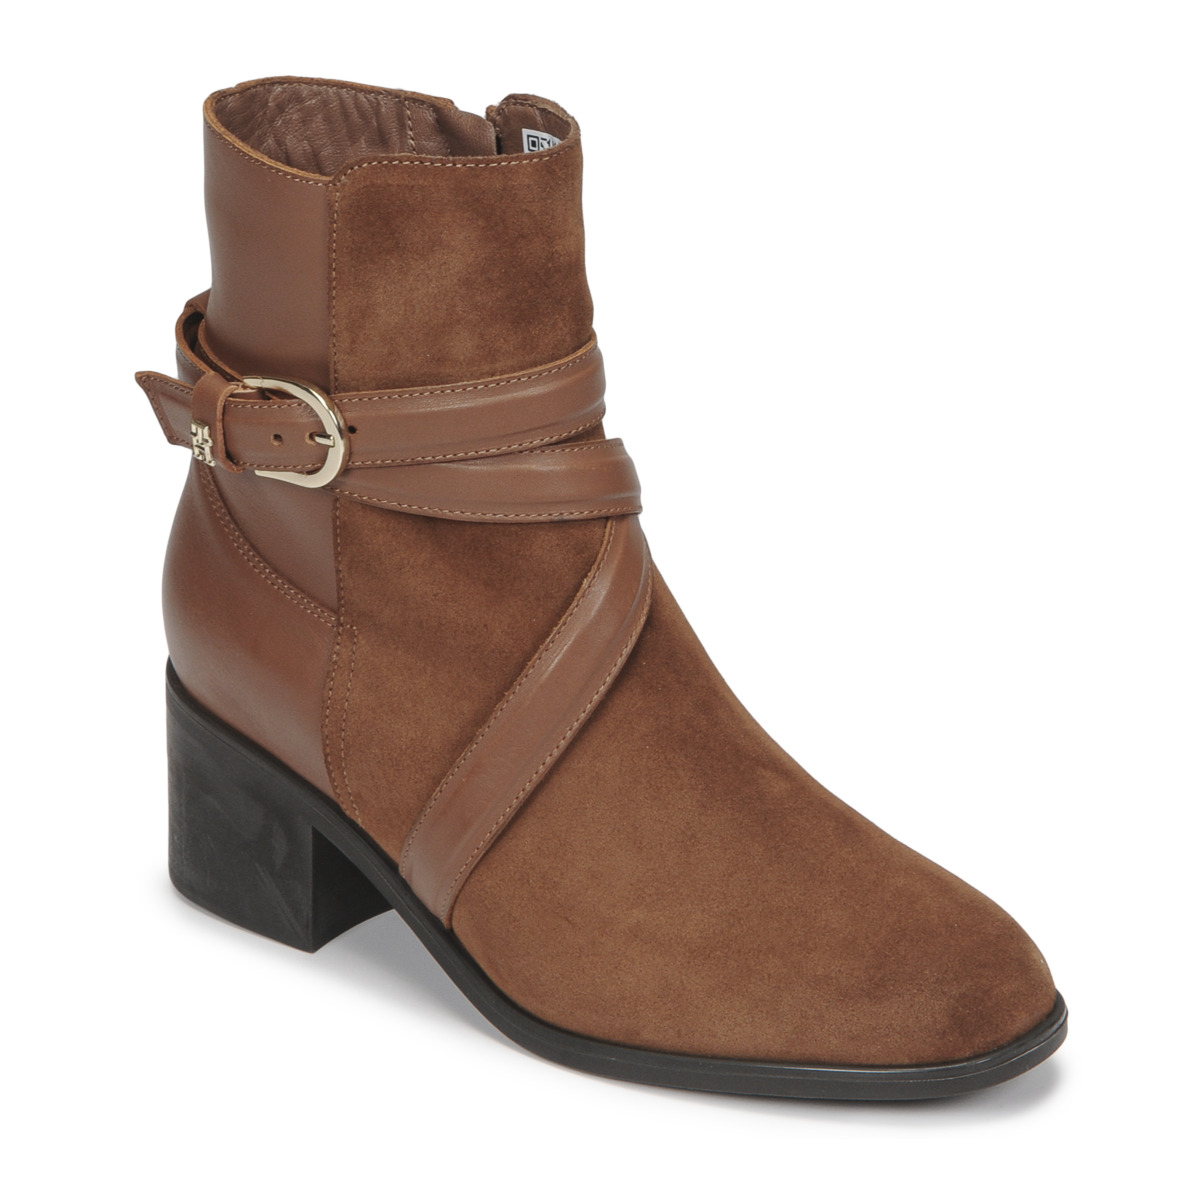 Sapatos Mulher Tommy Hilfiger Iconic Quarter Носки 2 пары ELEVATED ESSENTIAL MIDHEEL BOOT Camel